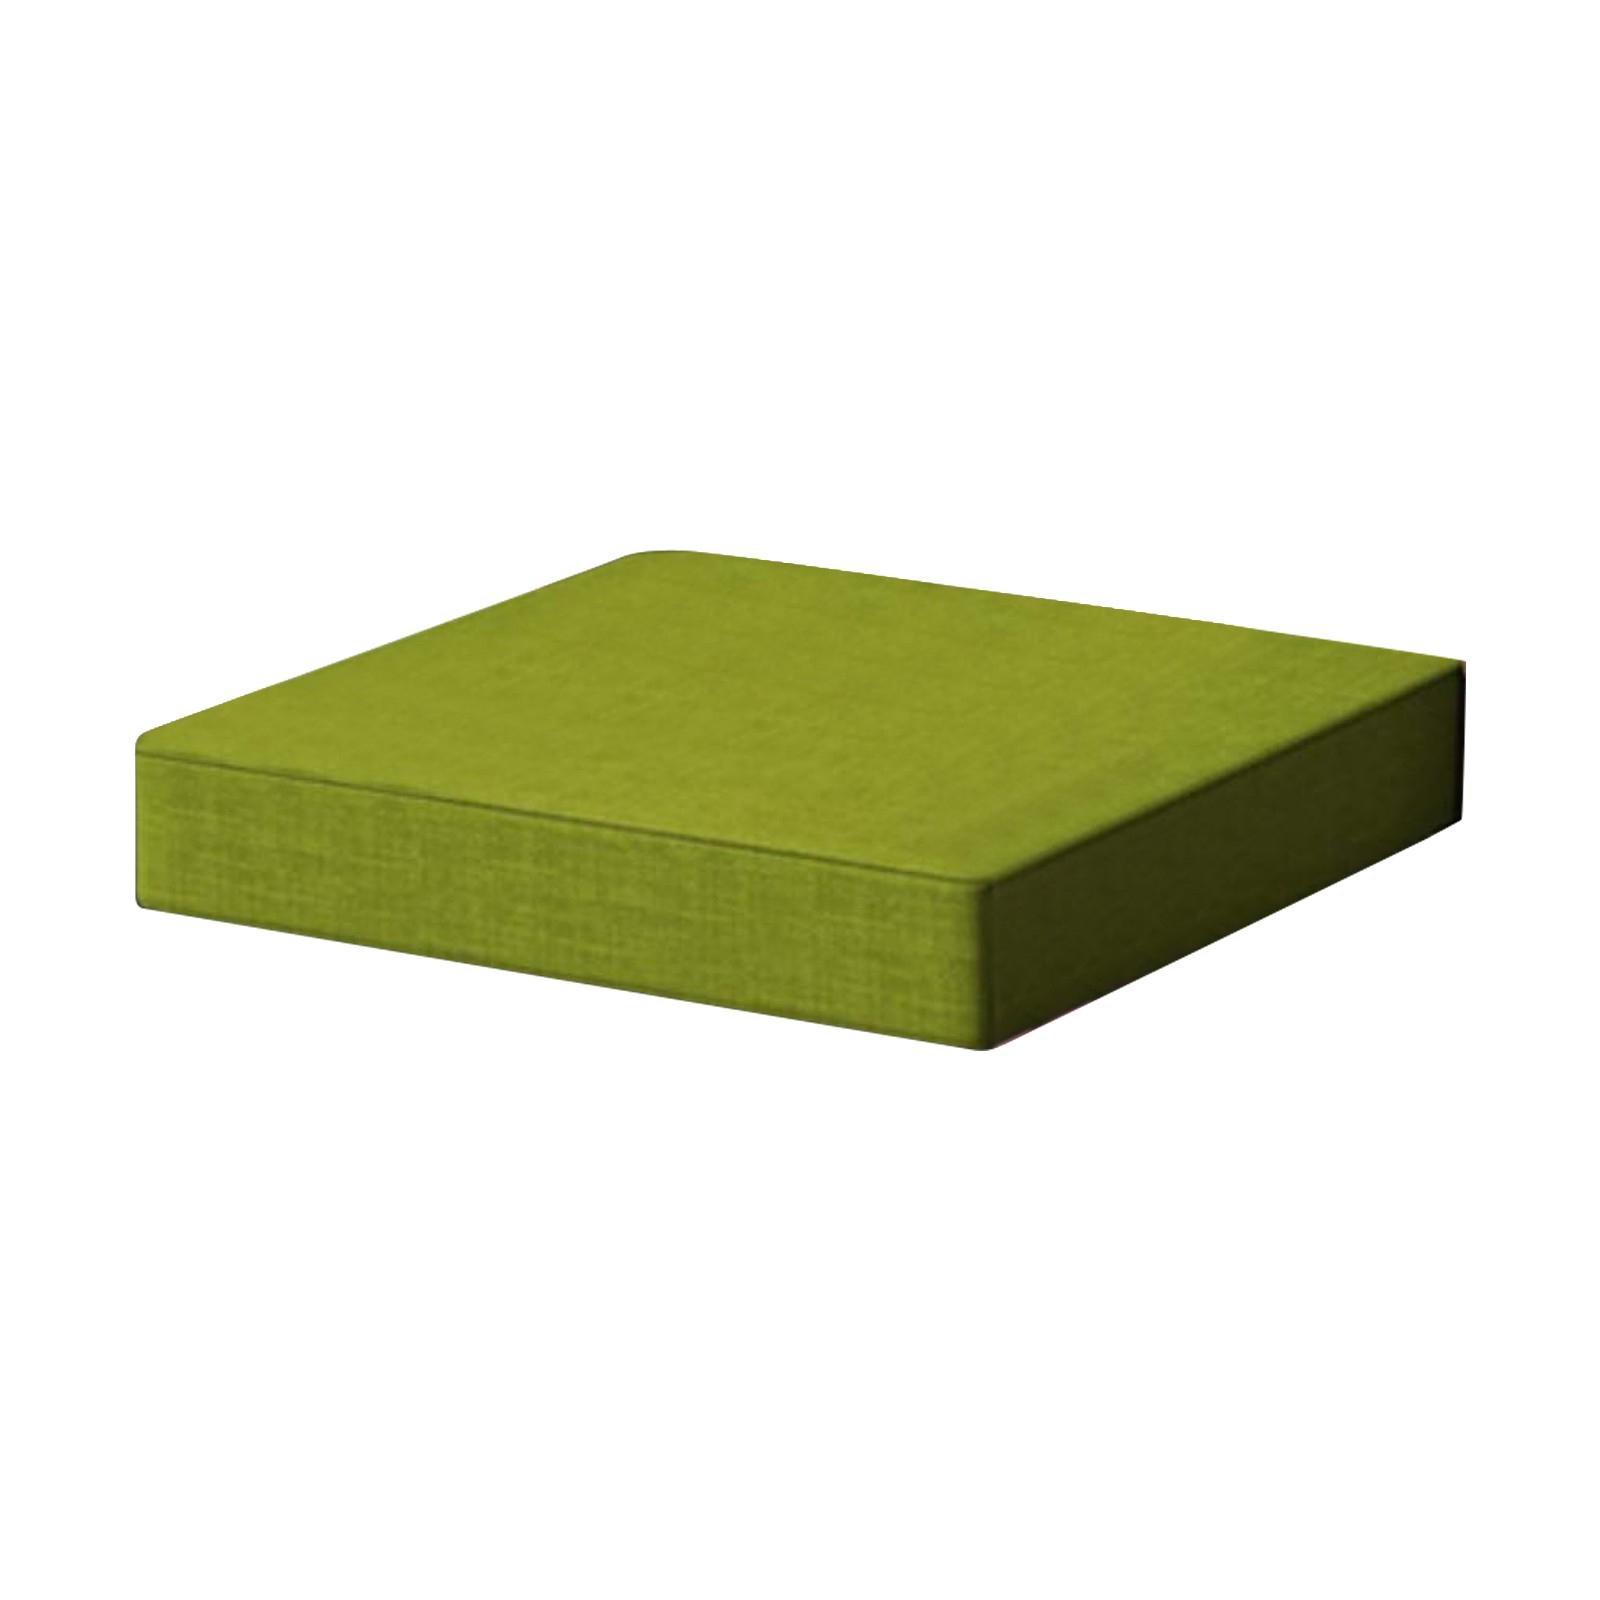 Seat Pads Cushion ,Waterproof Chair Cushions Garden Cushion,Furniture Seat Pads Cushion Pad Indoors Outdoors,Garden Seat Pads Cushion Memory Foam for chairs, Garden Green - image 1 of 6